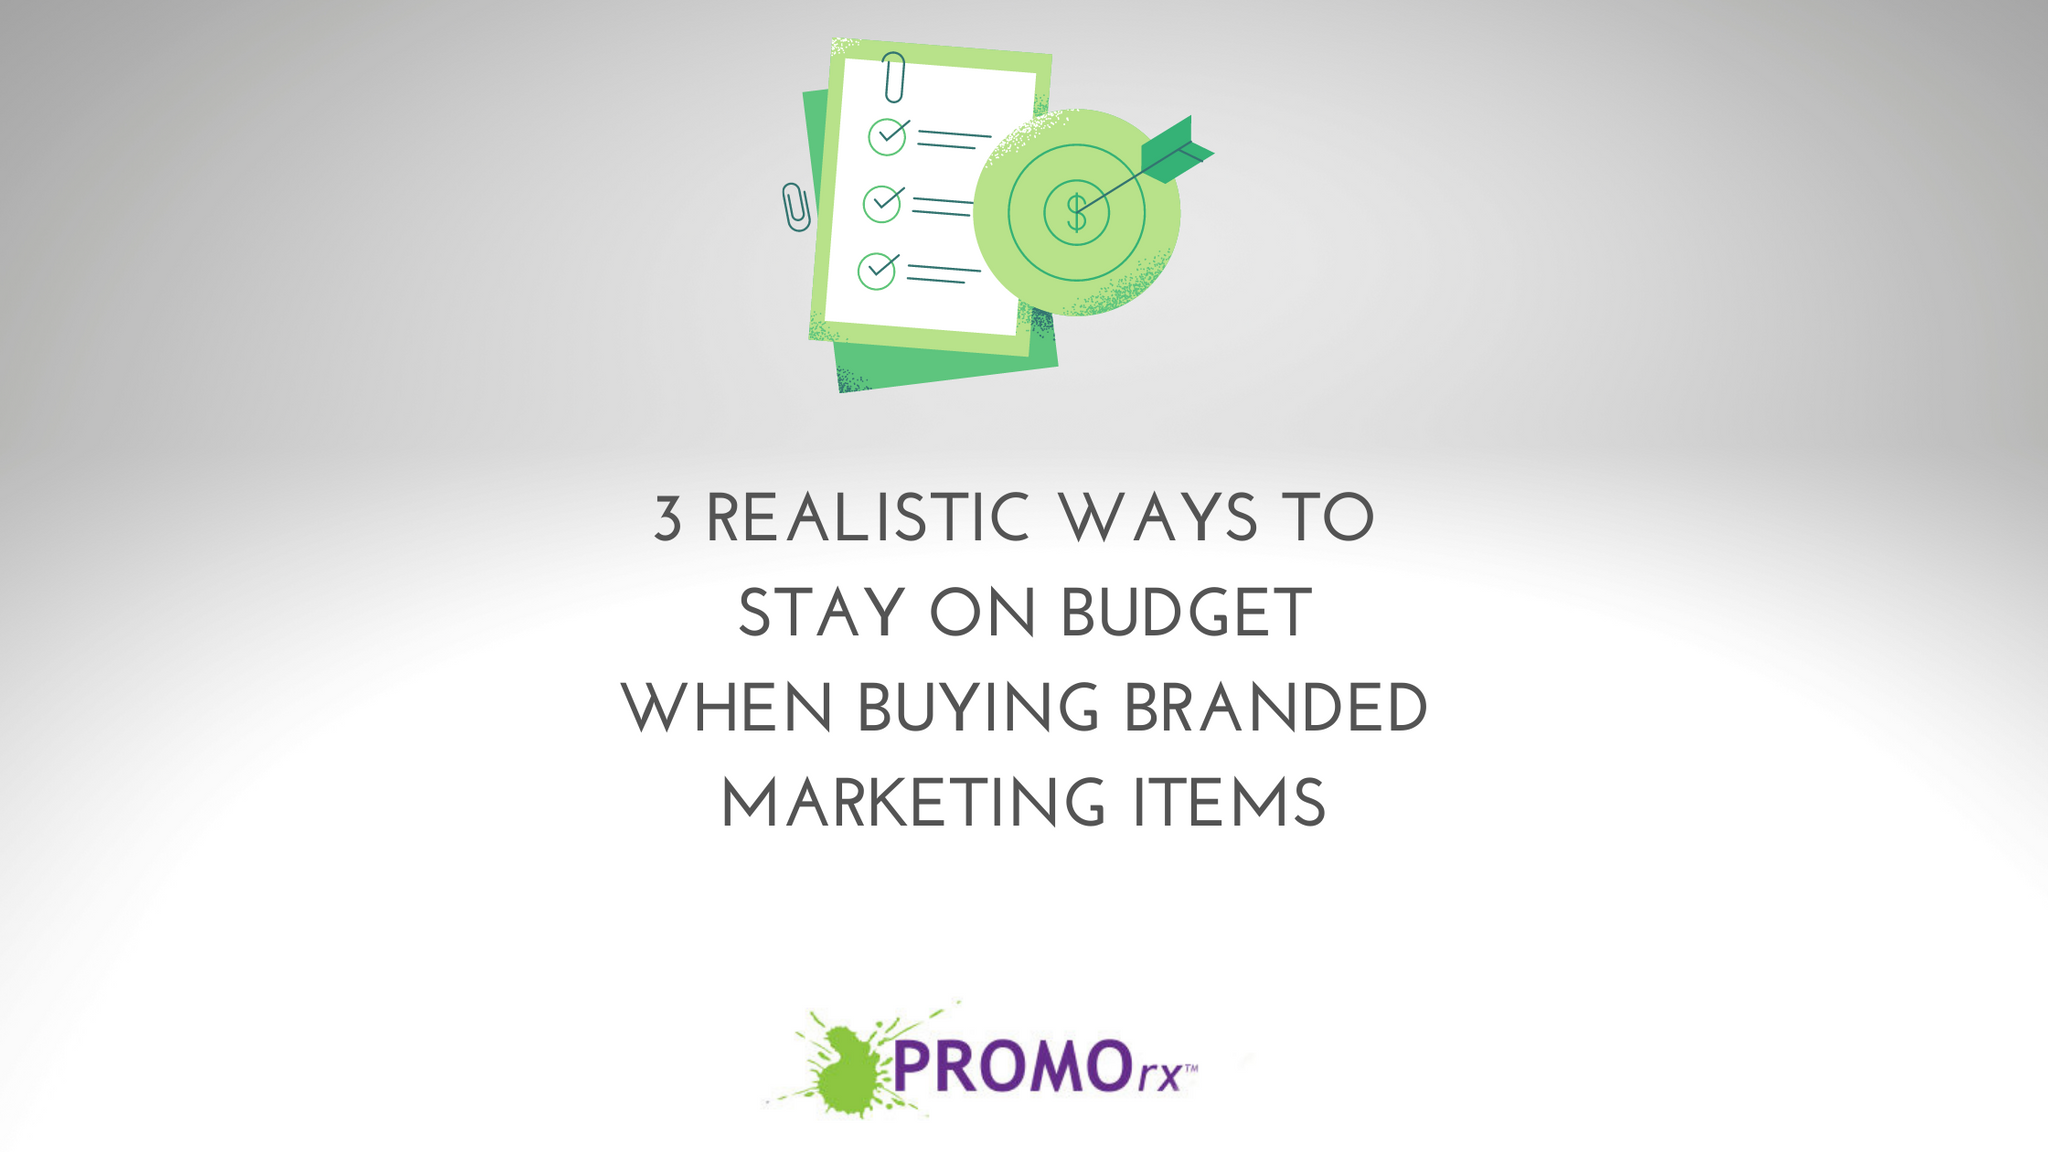 3 Realistic Ways to Stay on Budget When Buying Branded Marketing Items